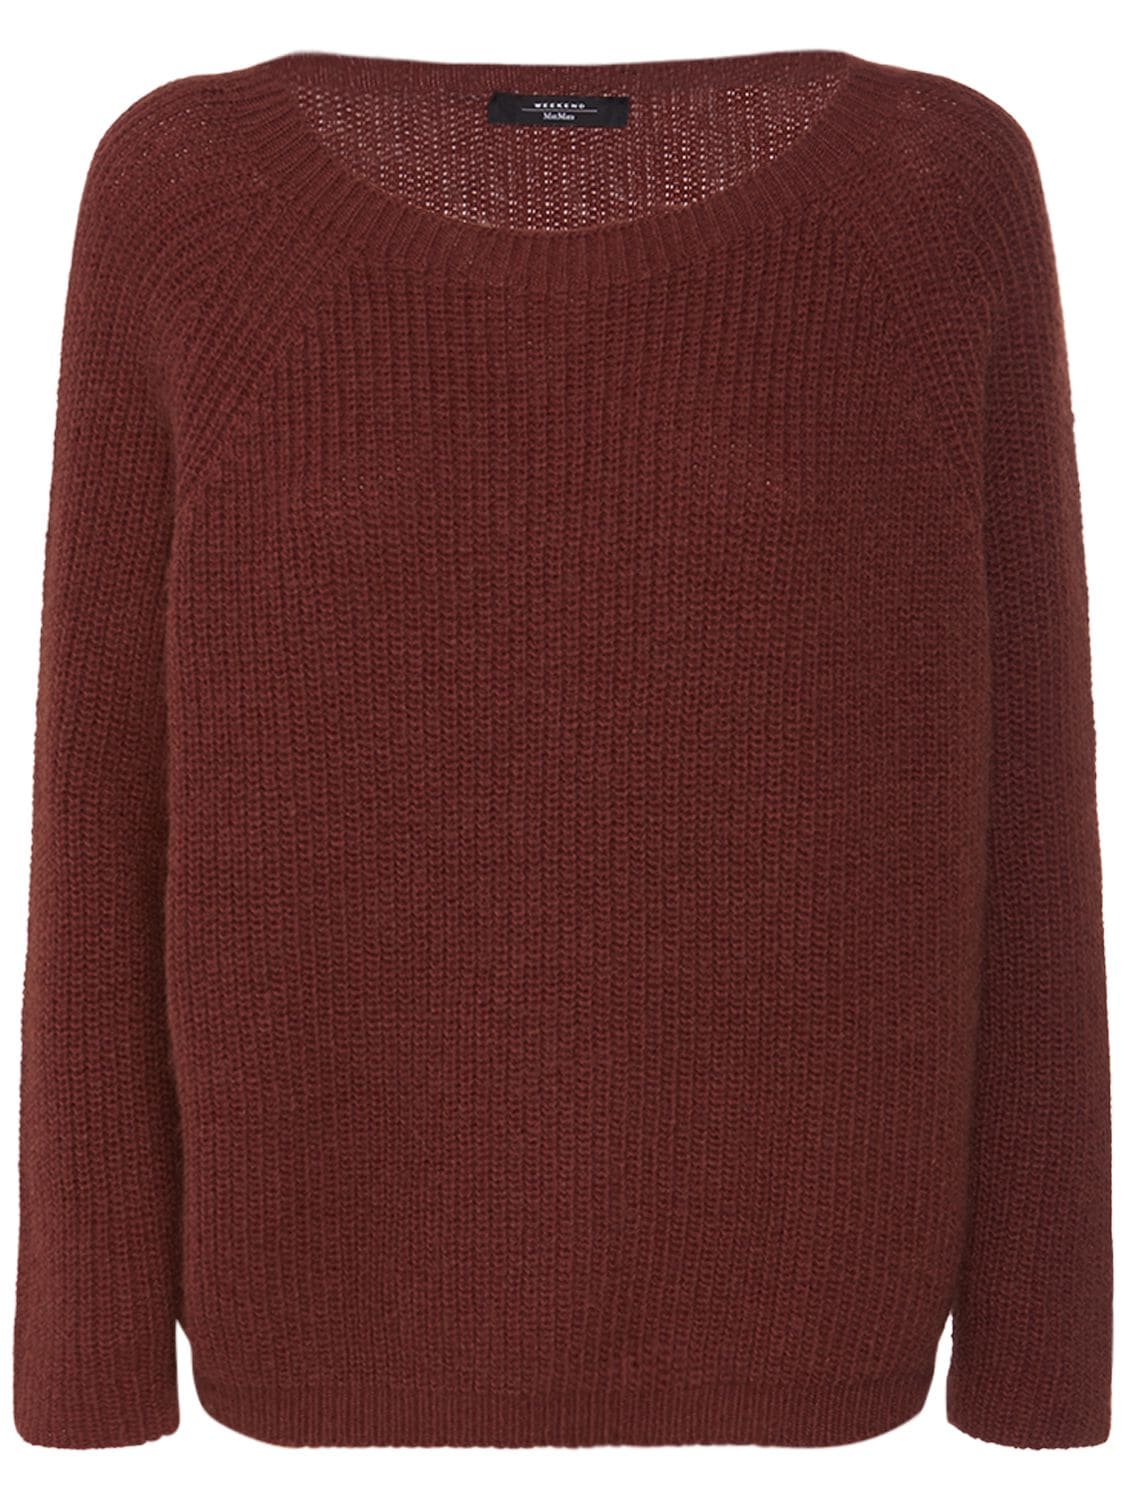 Image of Xeno Knit Mohair Blend Crewneck Sweater